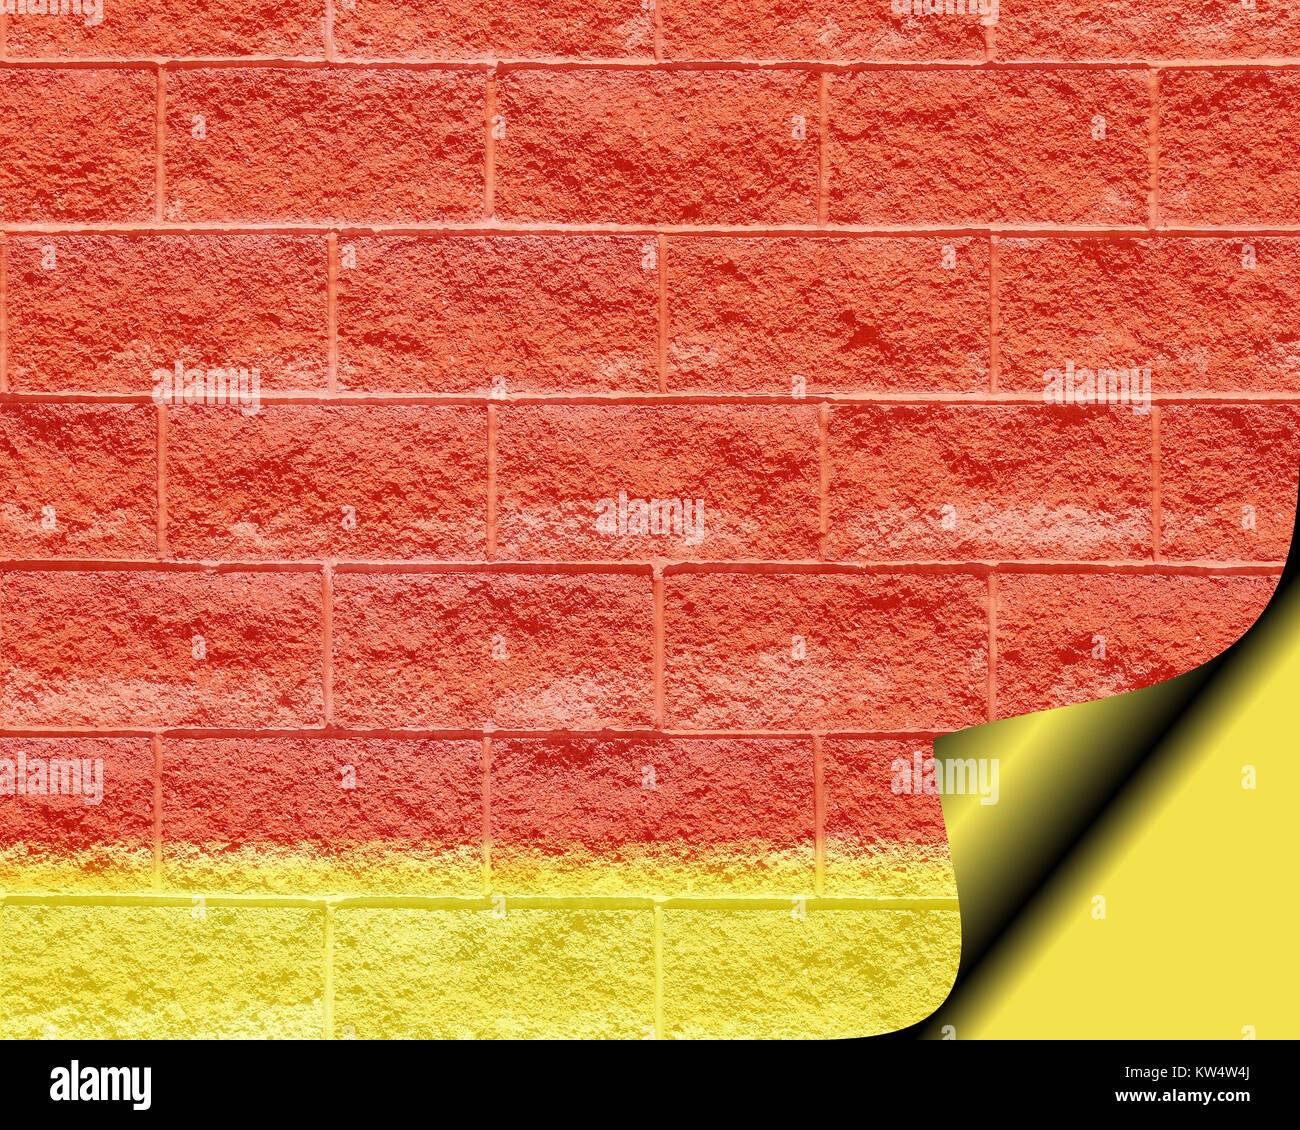 Red brick wall with yellow strip of abstract color along bottom with page curl Stock Photo